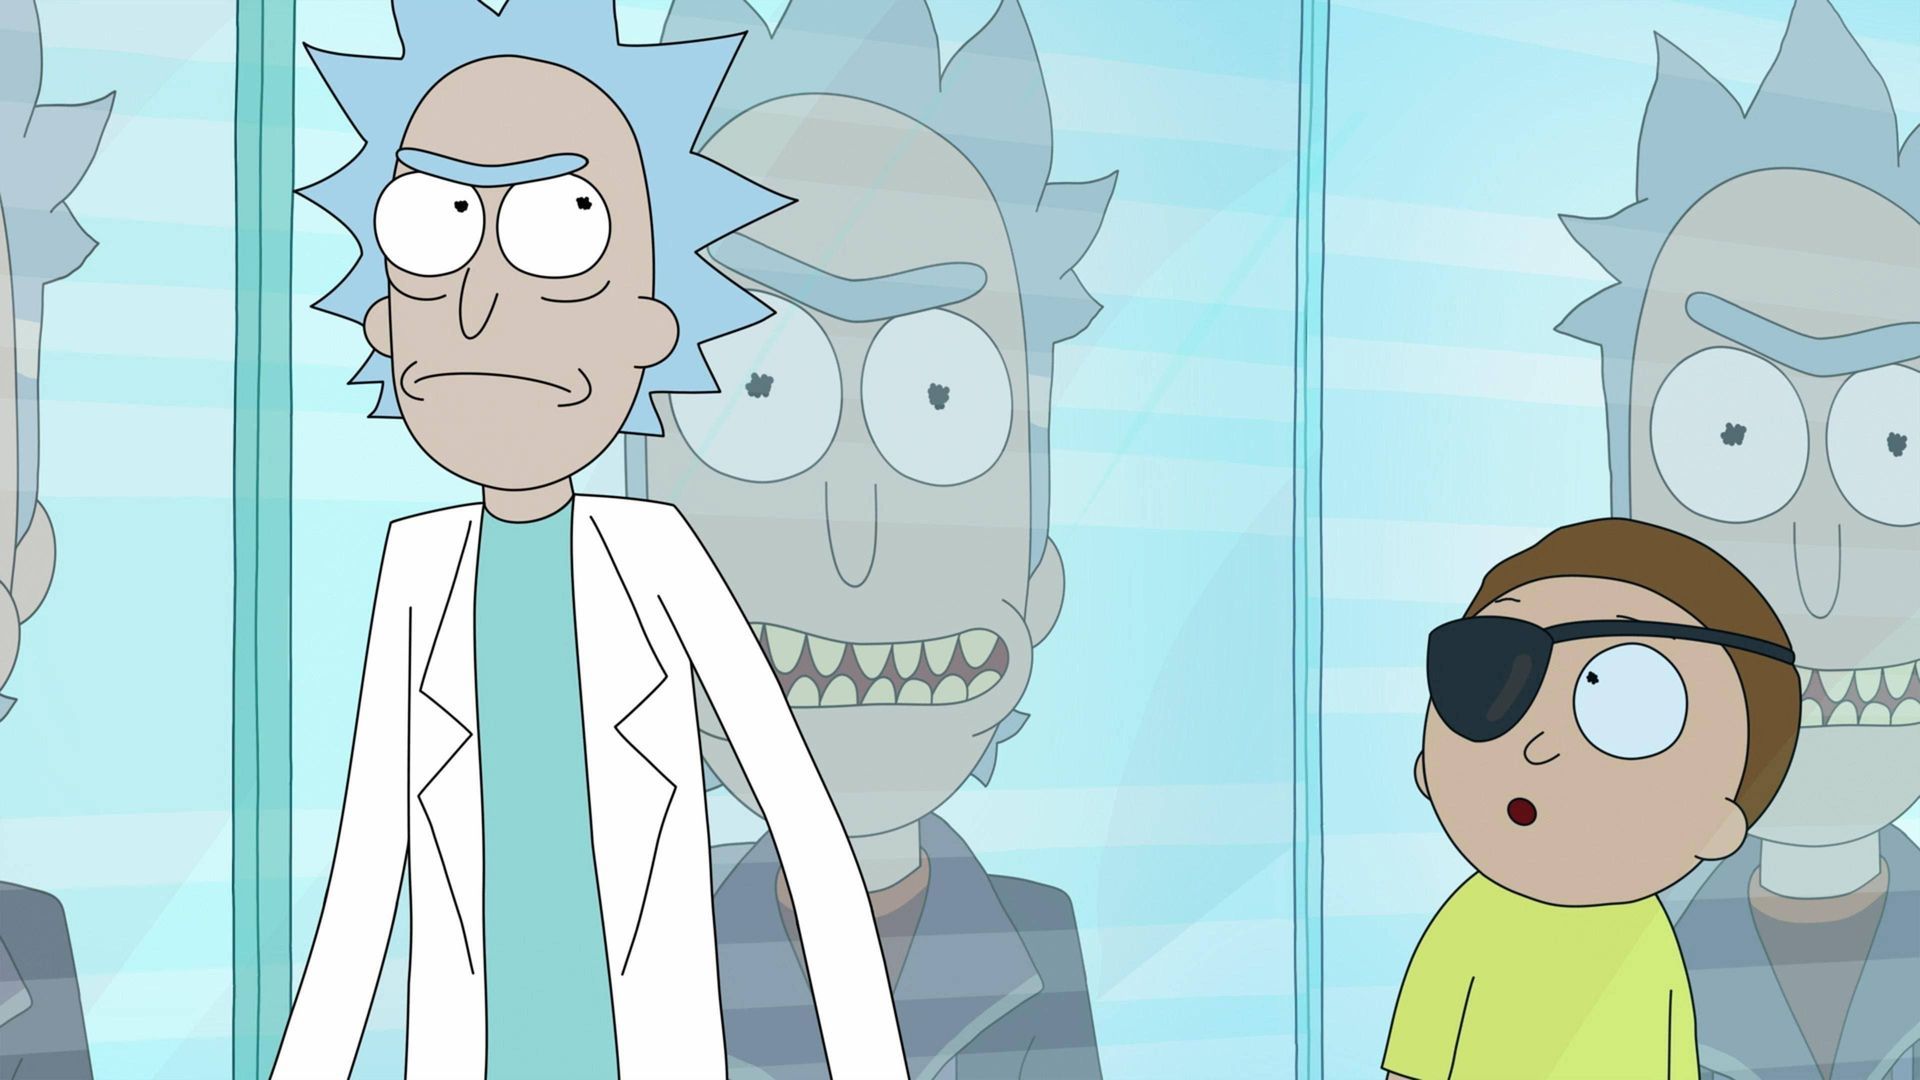 How to watch 'Rick and Morty' Season 7 for free online - Beem